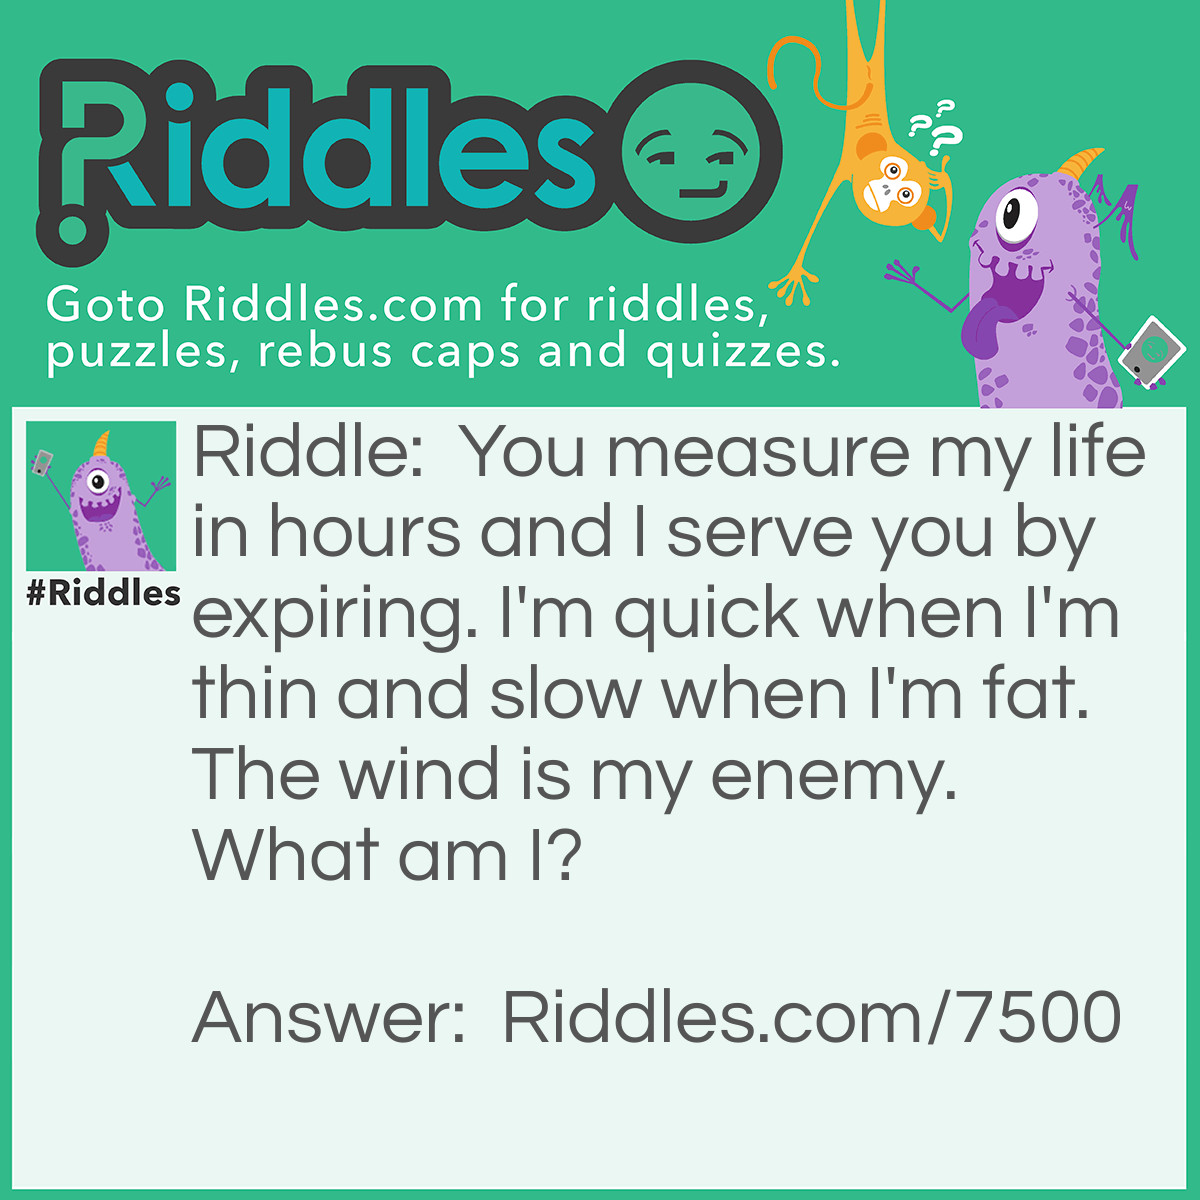 Riddle: You measure my life in hours and I serve you by expiring. I'm quick when I'm thin and slow when I'm fat. The wind is my enemy. What am I? Answer: It's a candle.